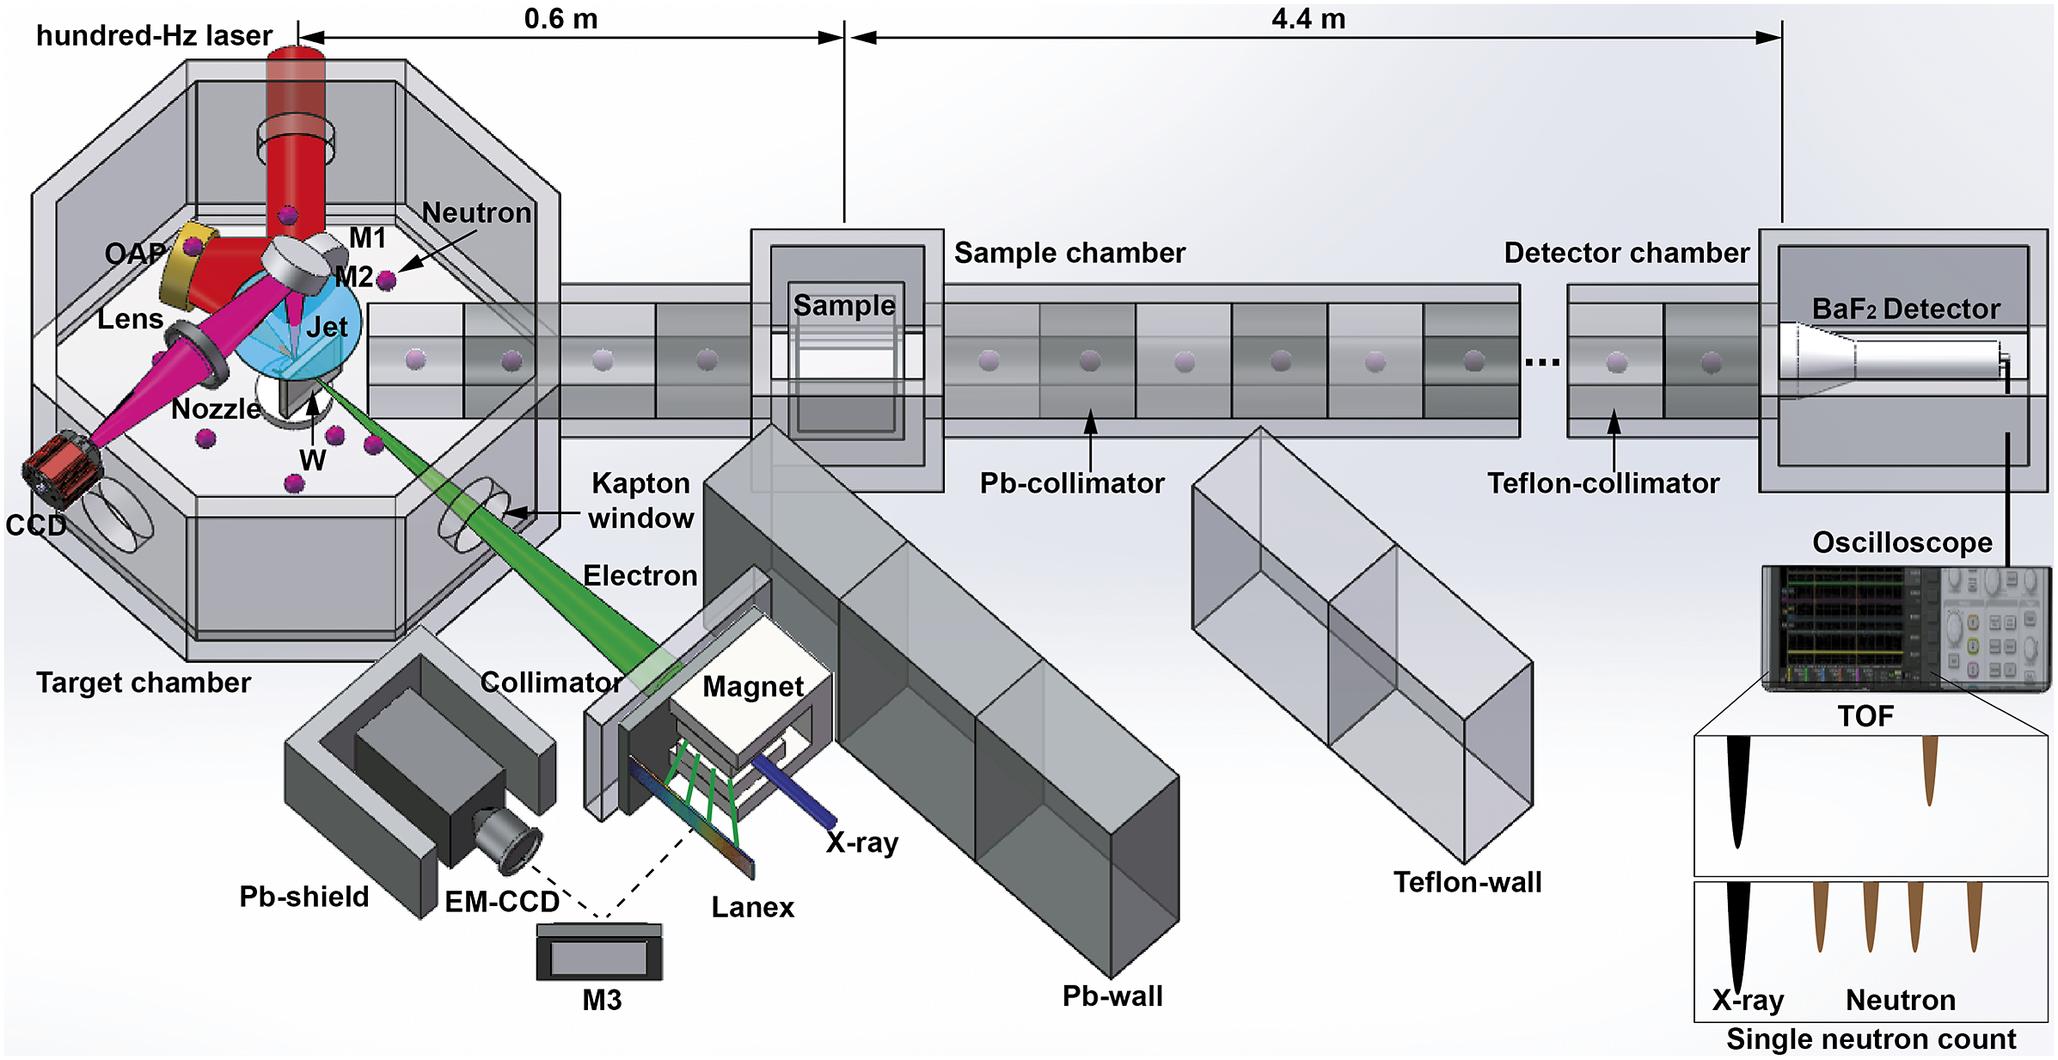 Design of the experimental setup for the generation of an ultra-short pulsed neutron source and the fast neutron absorption spectroscopy.